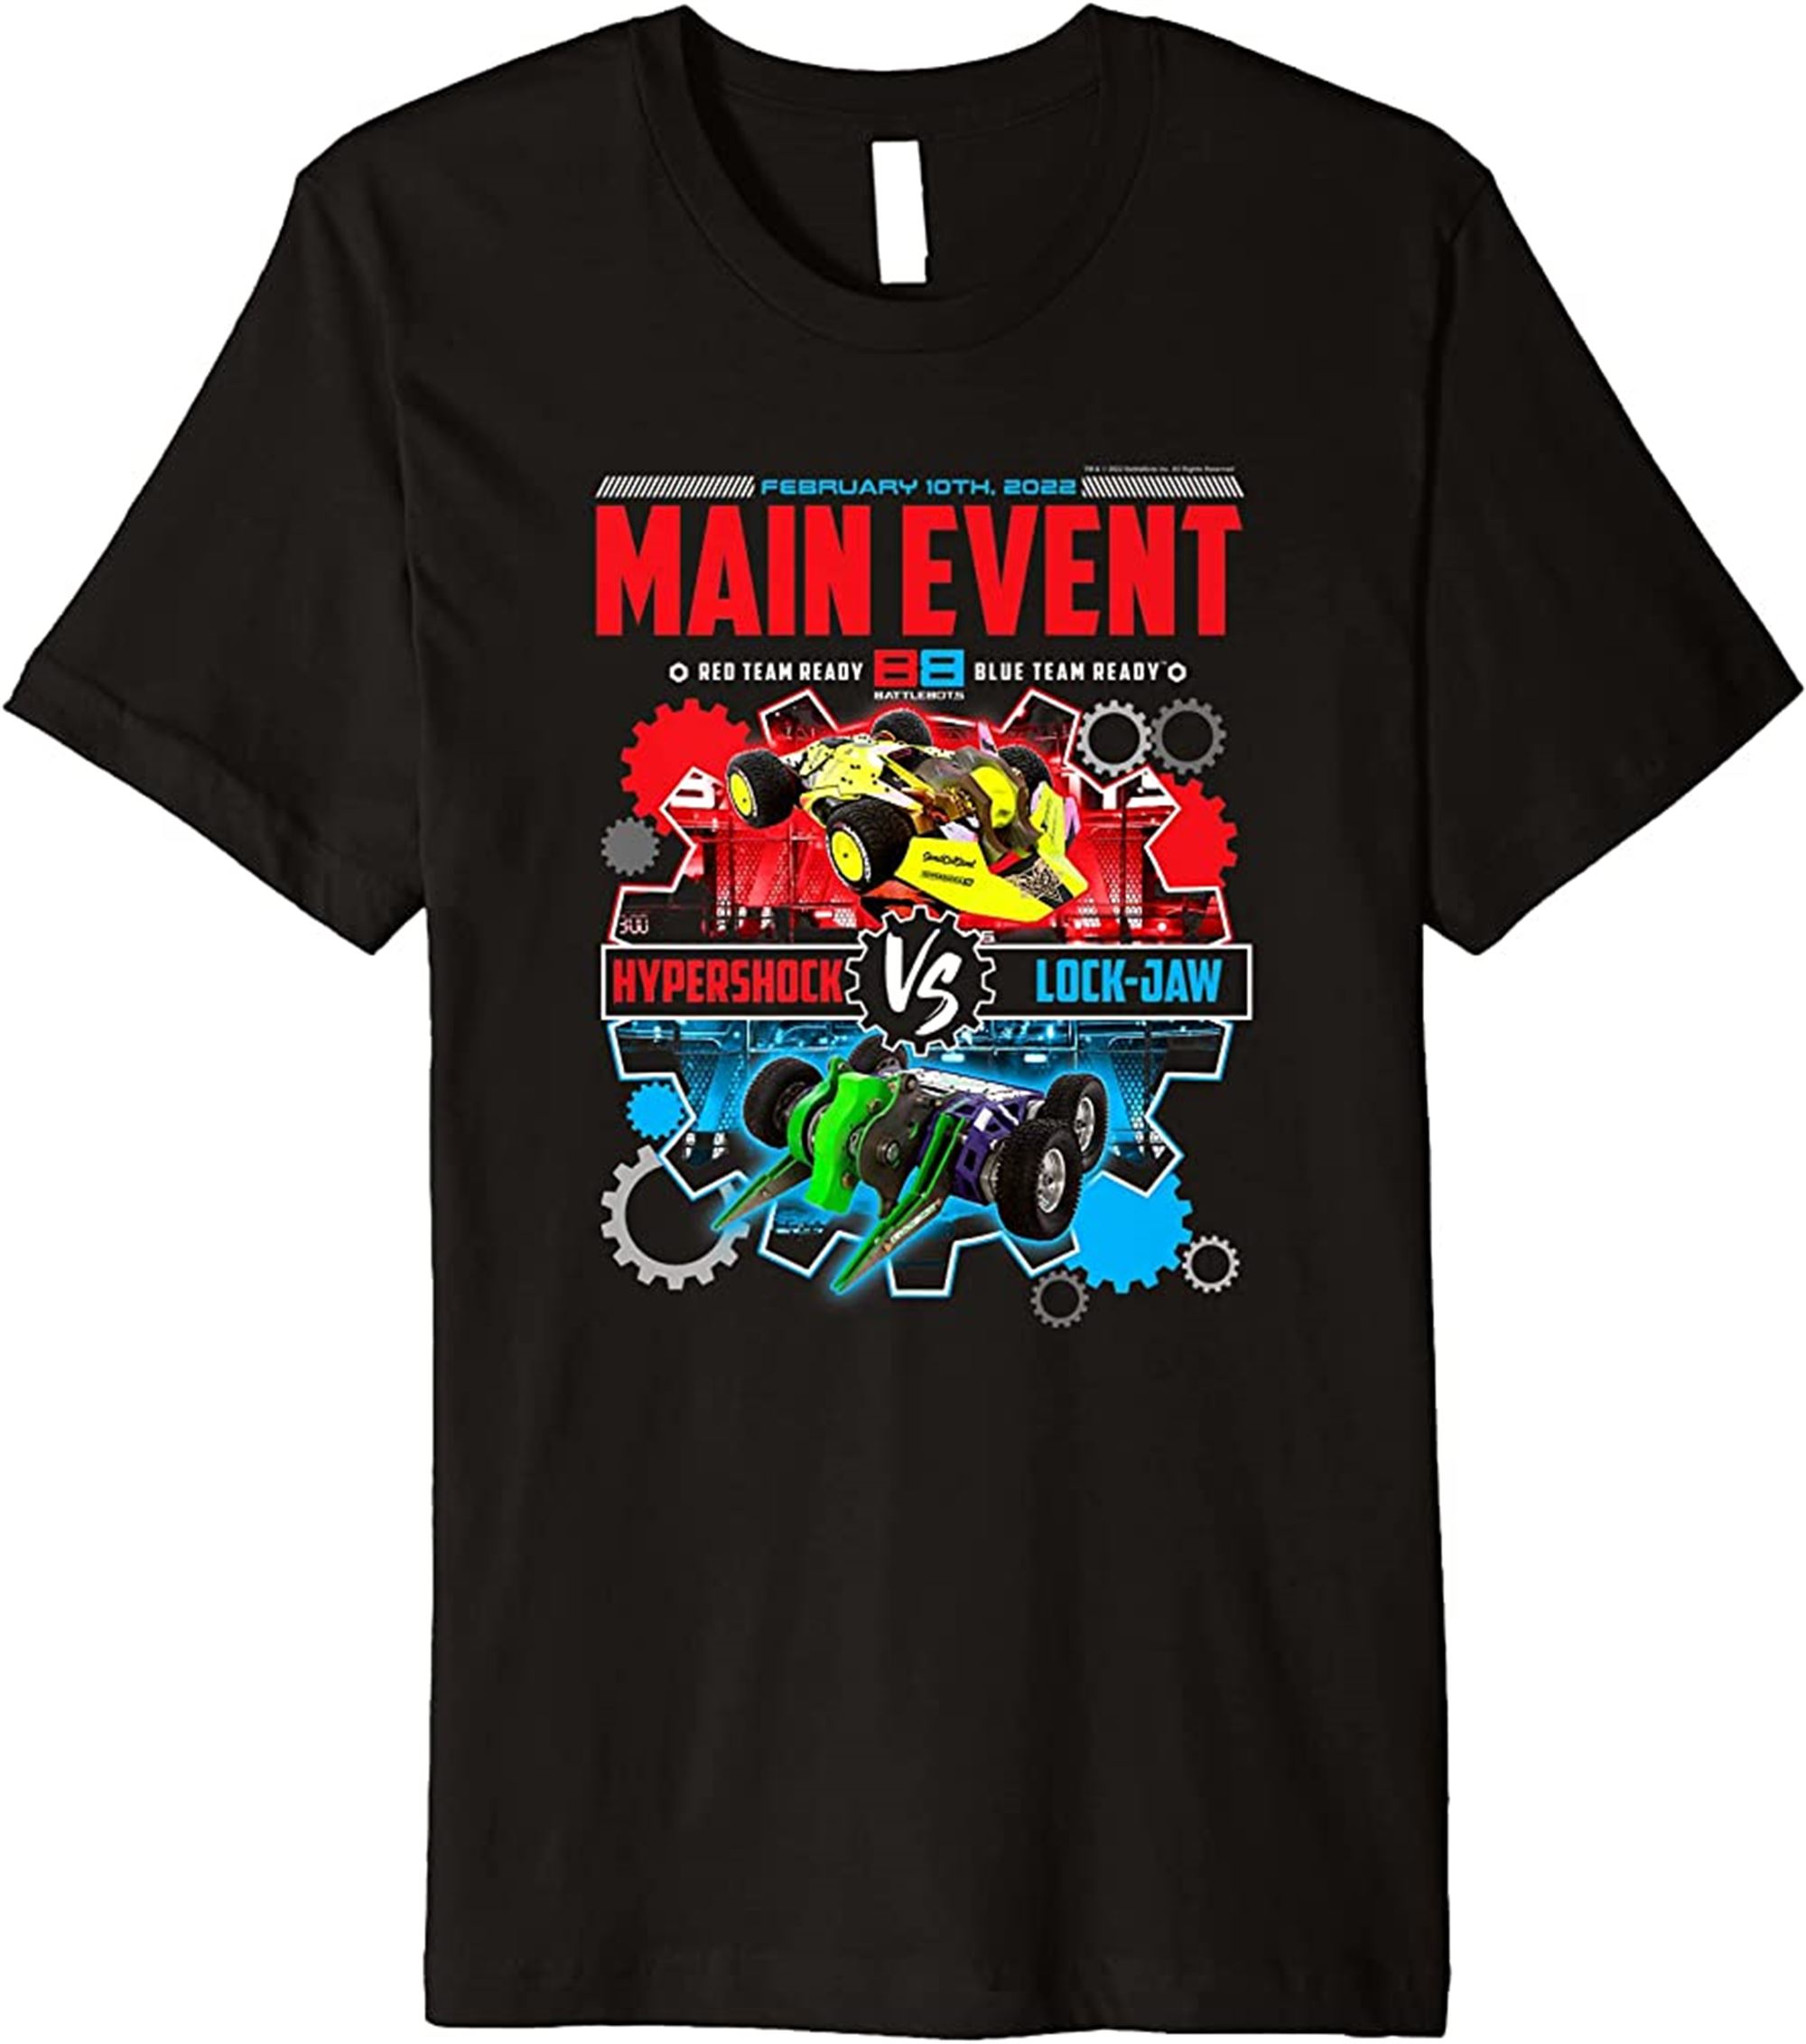 February 10th Main Event Hypershock Vs Lock Jaw Premium Tshirt Full Size Up To 5xl